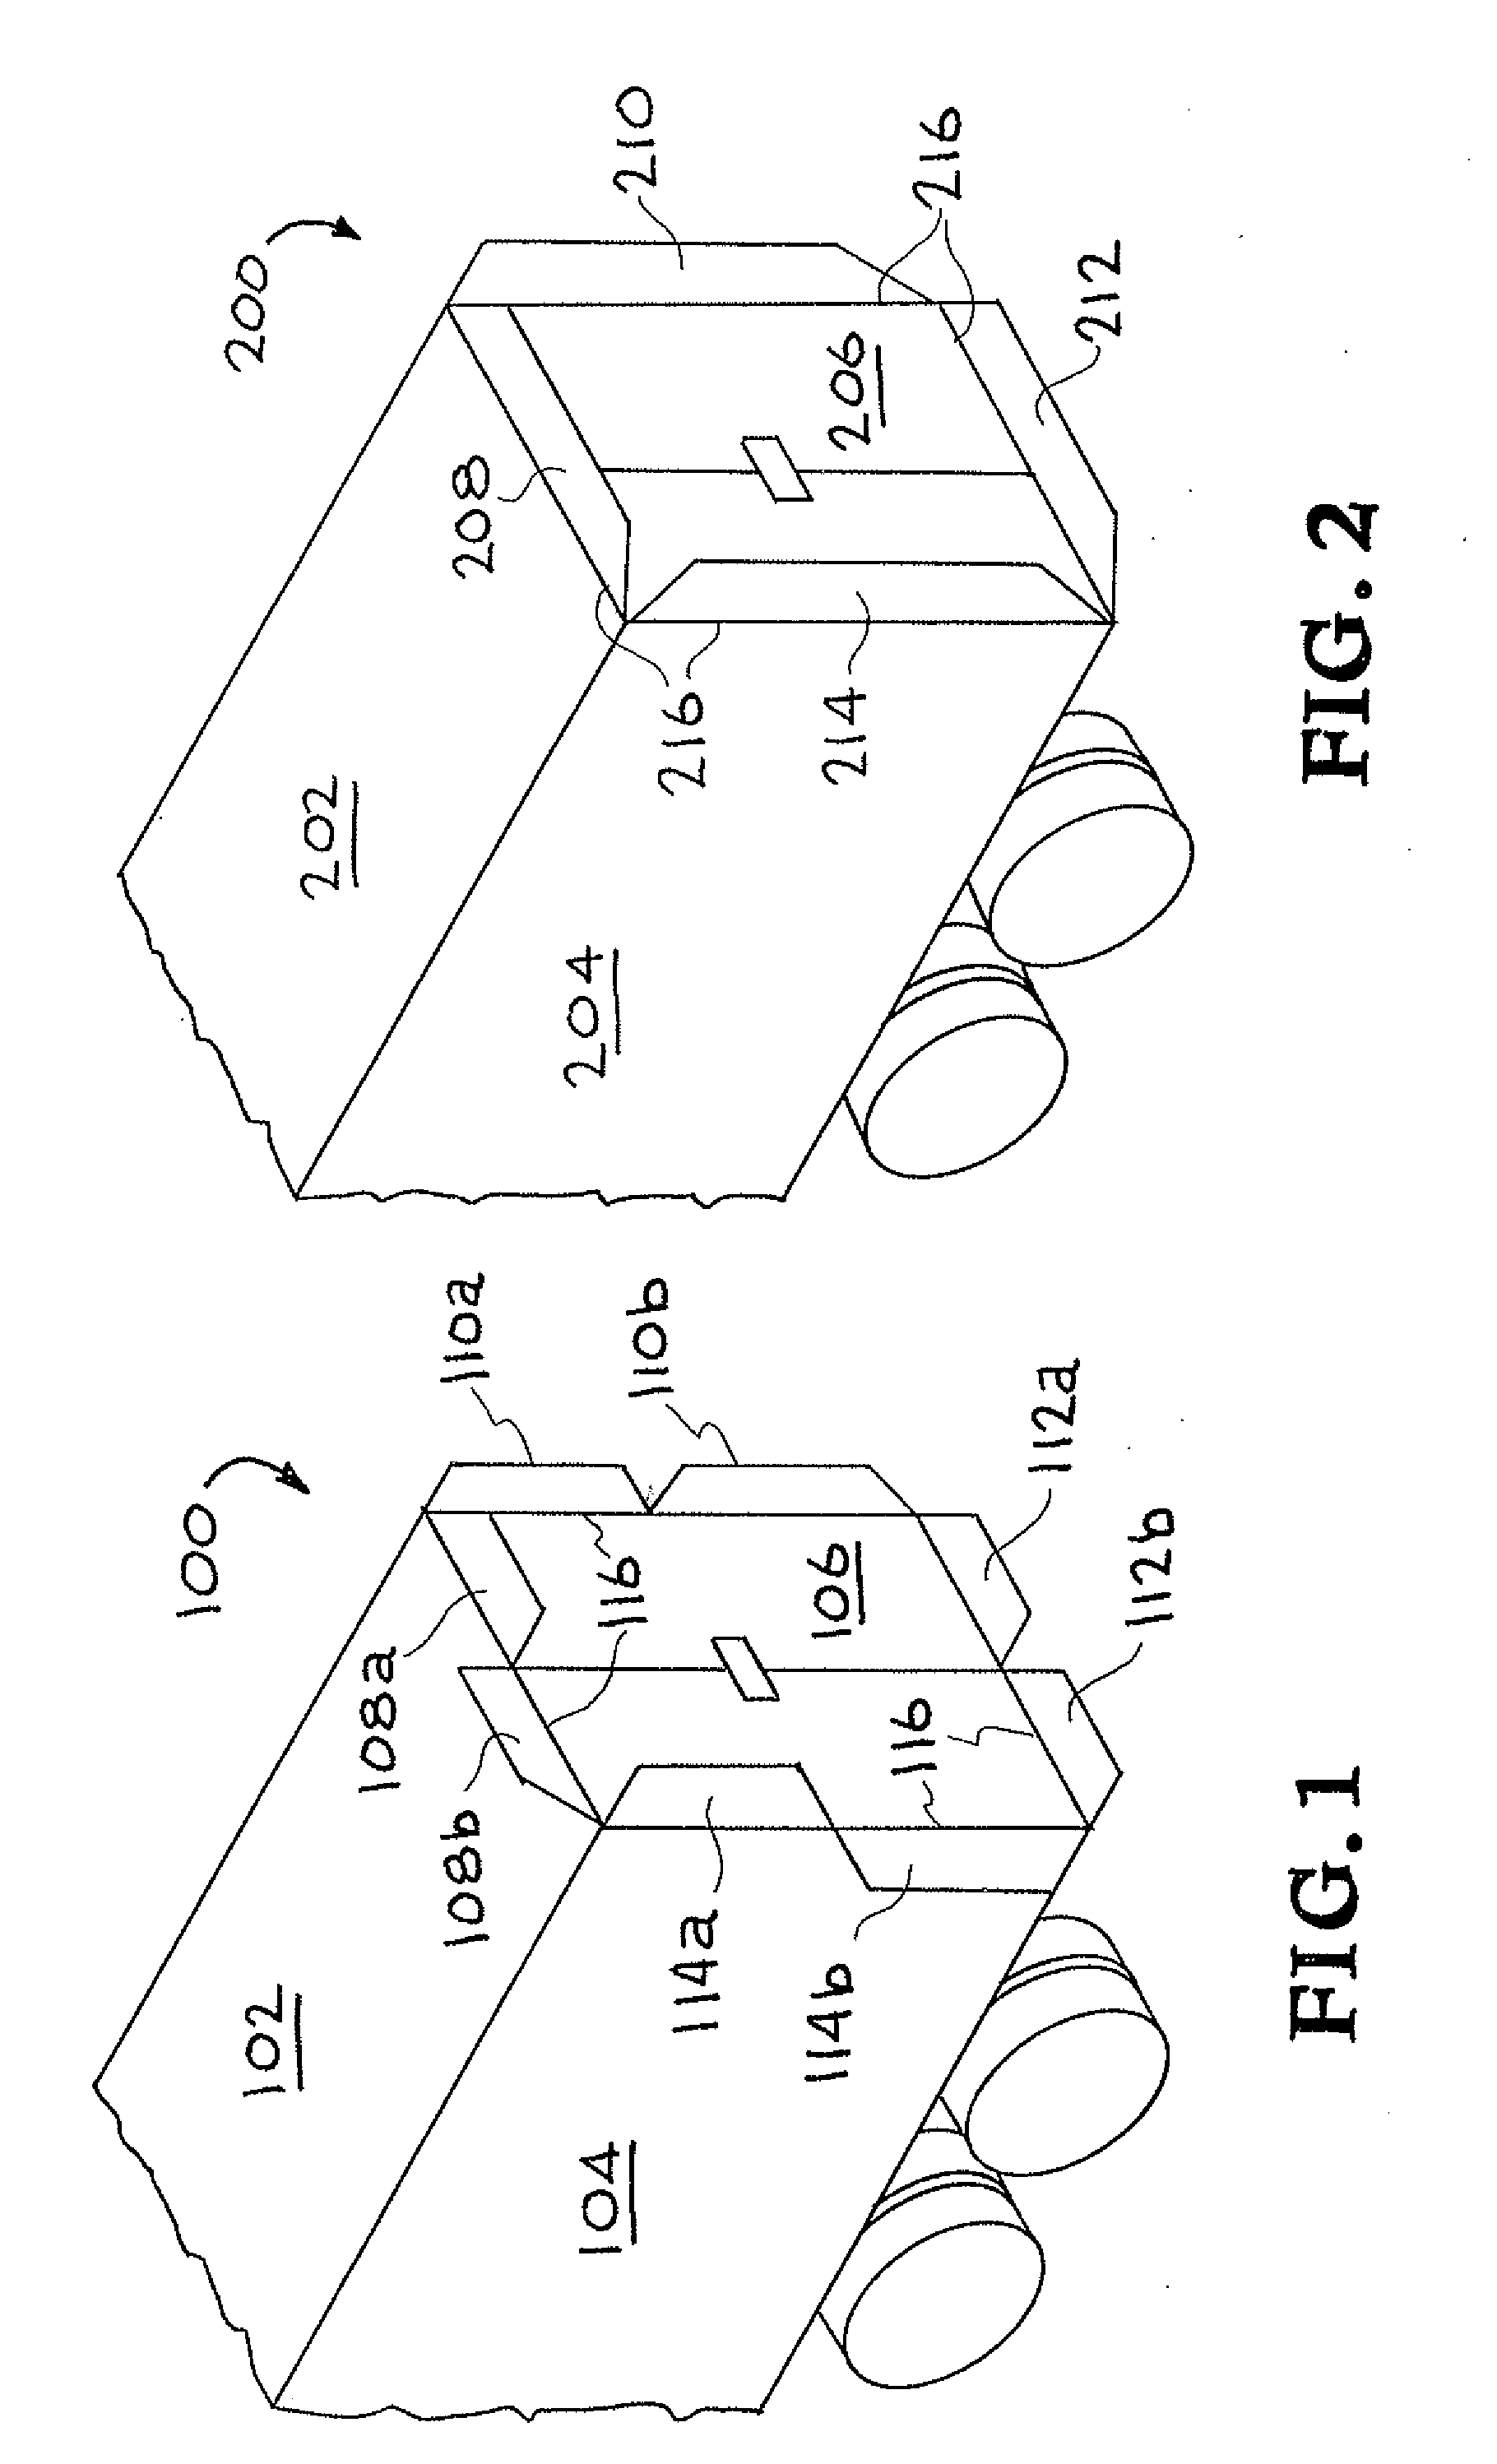 Articulating base flaps for aerodynamic base drag reduction and stability of a bluff body vehicle